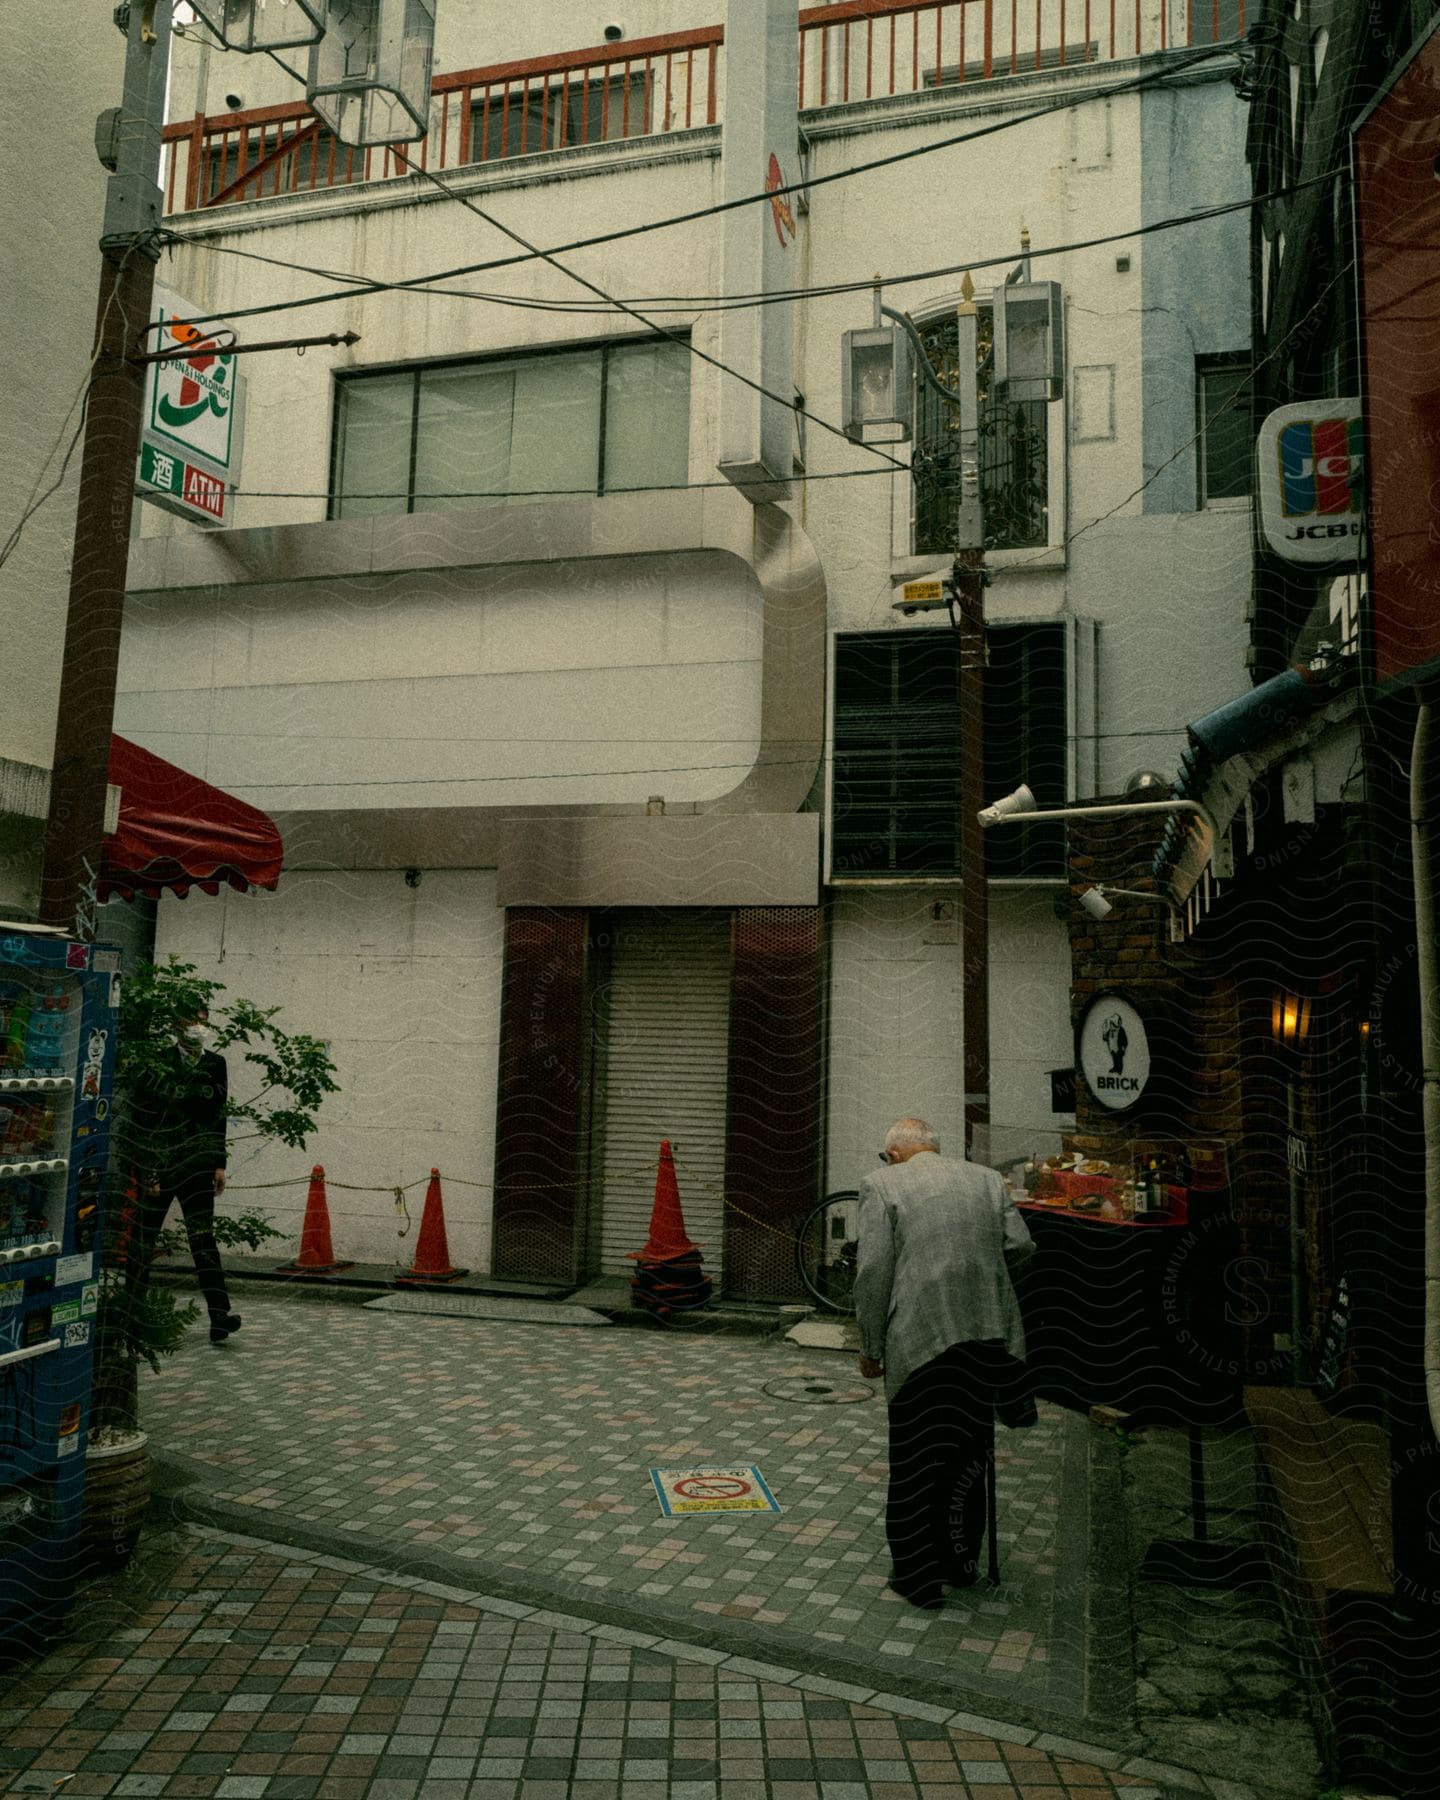 Elderly man walking in a quiet urban alley with shopfronts and a vending machine.